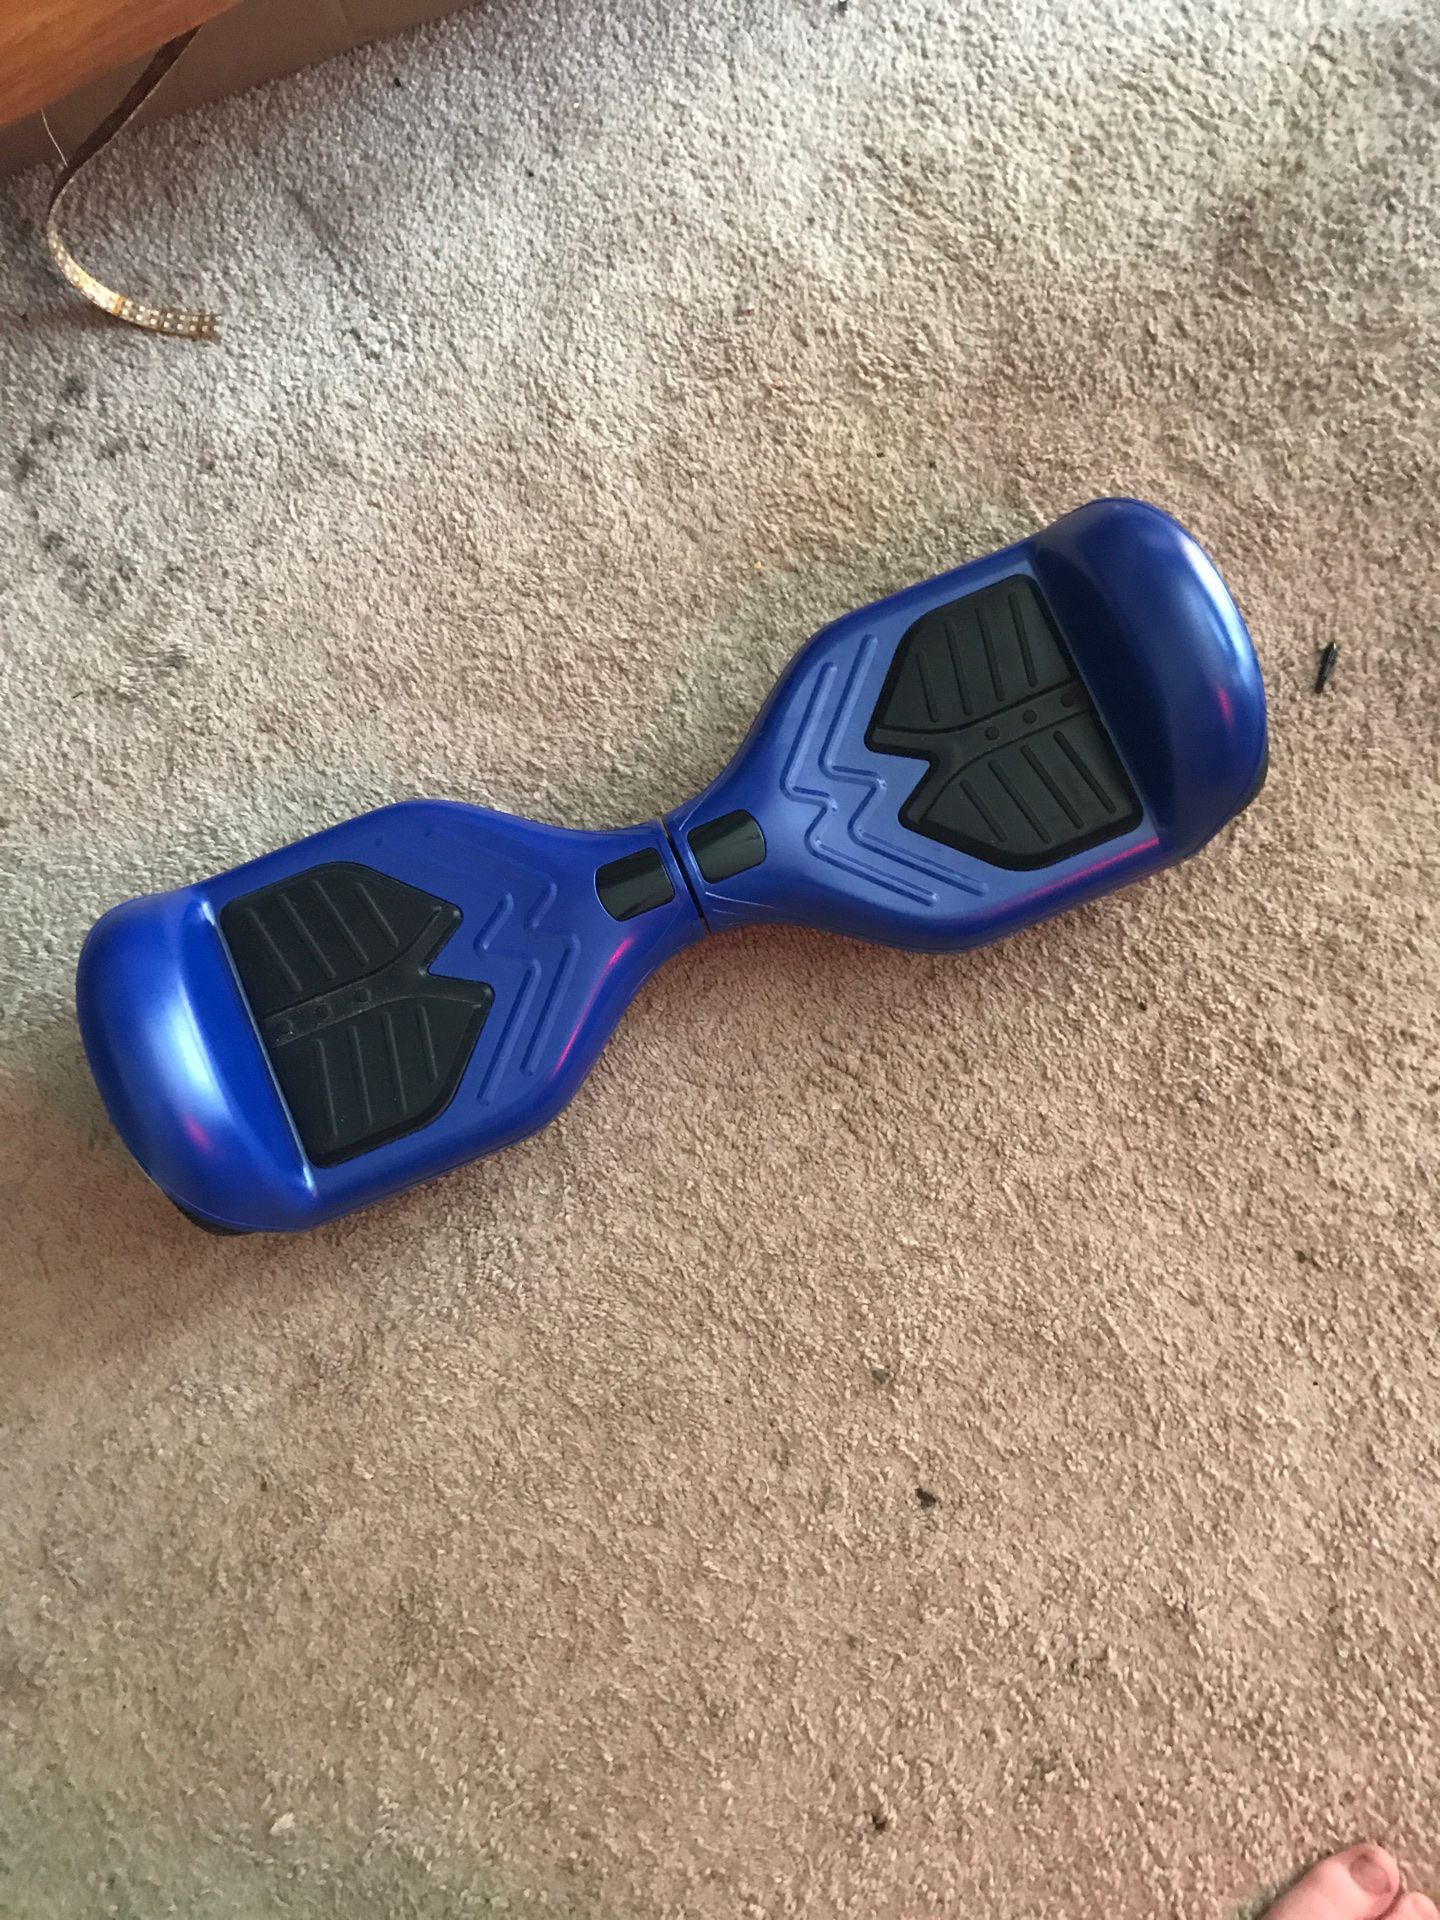 Hoverboard brand new needs charger